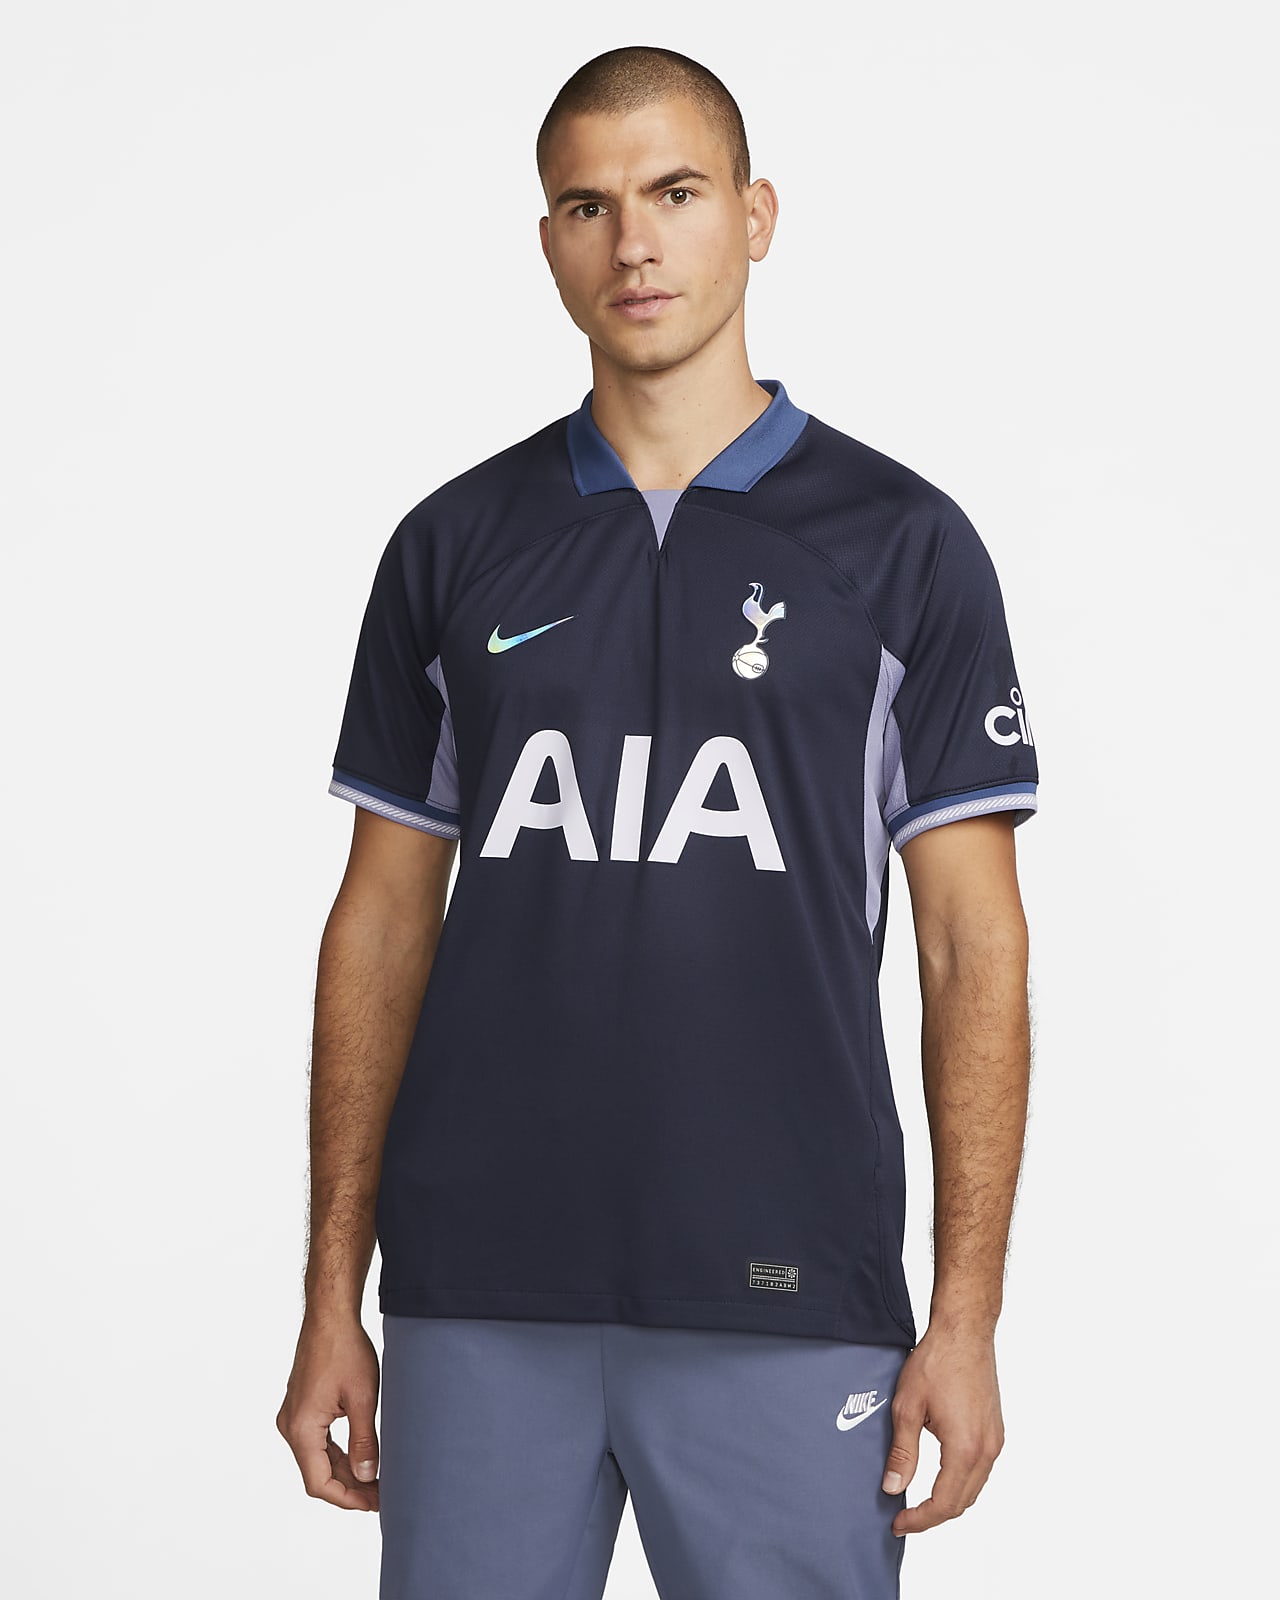 Tottenham Hotspur Baby Vests 2023/24, Very Limited Stock